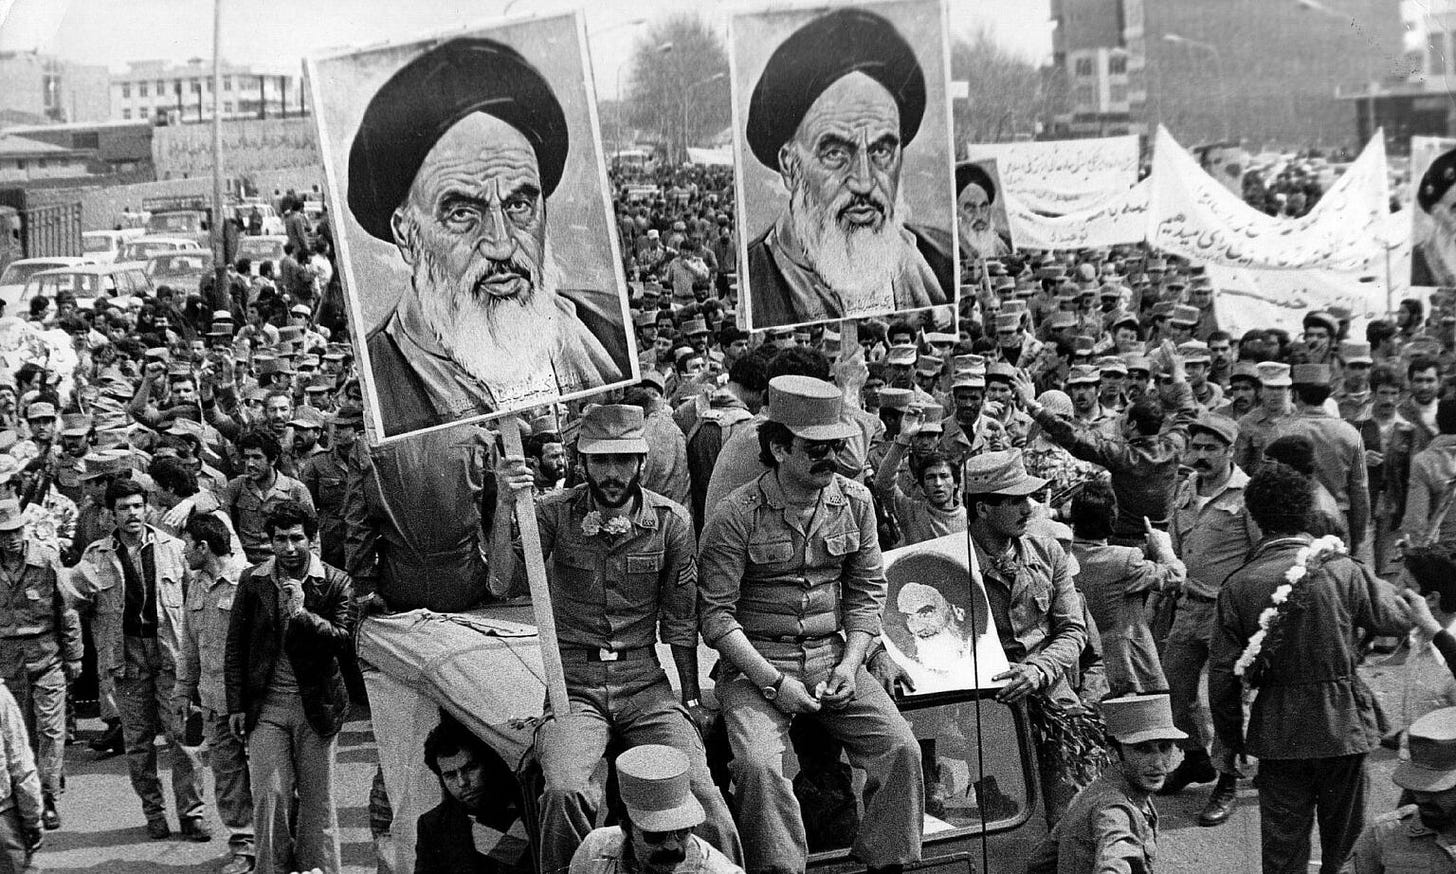 Iranian Islamic Republic Army soldiers carry posters of the Ayatollah Khomeini during the revolution of 1979.